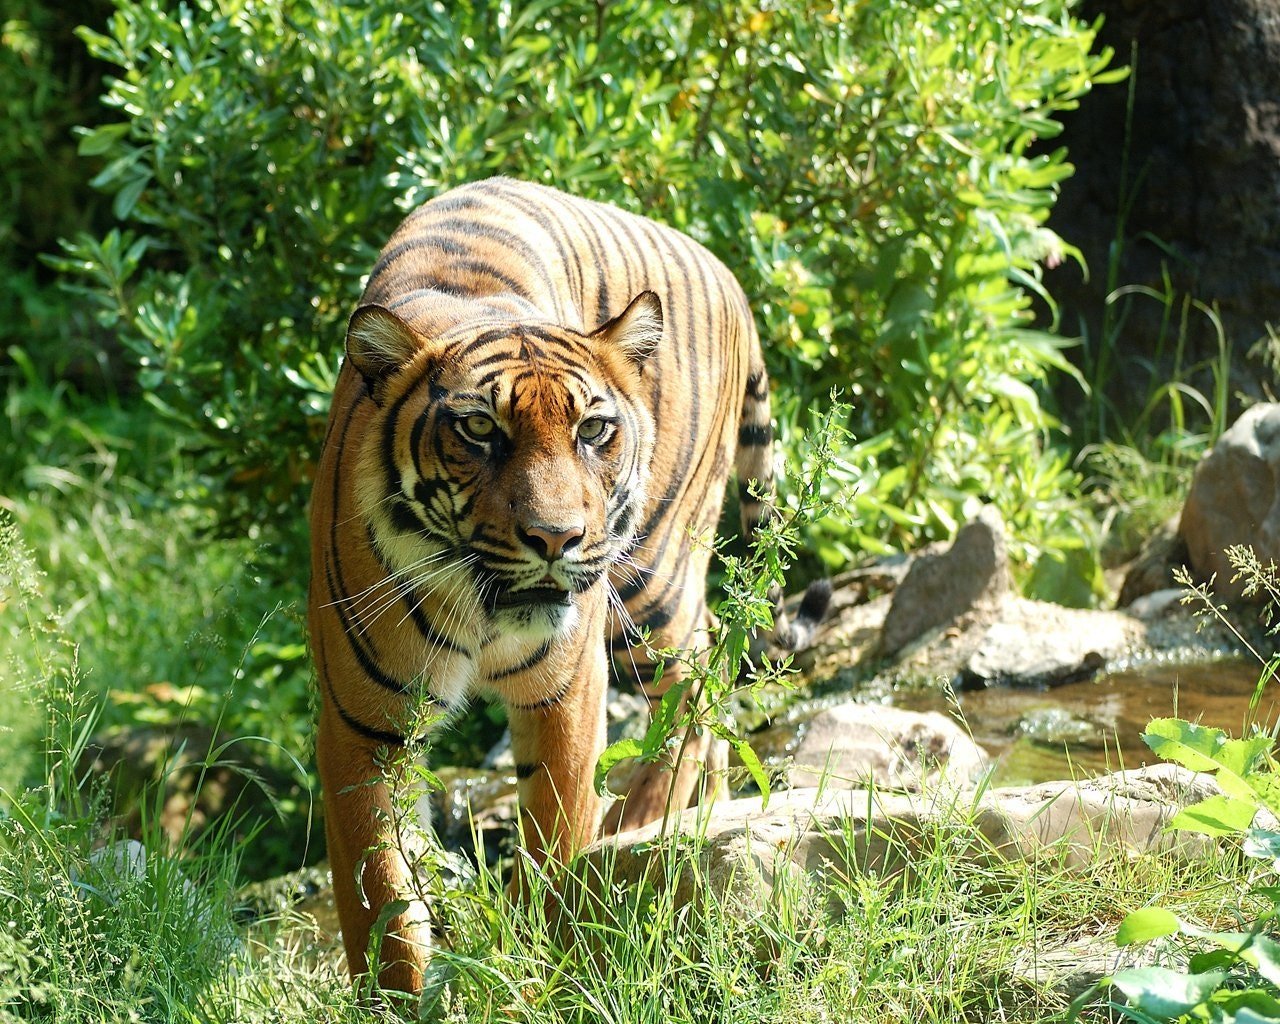 Picture of a tiger in a park | Photo: Pixabay